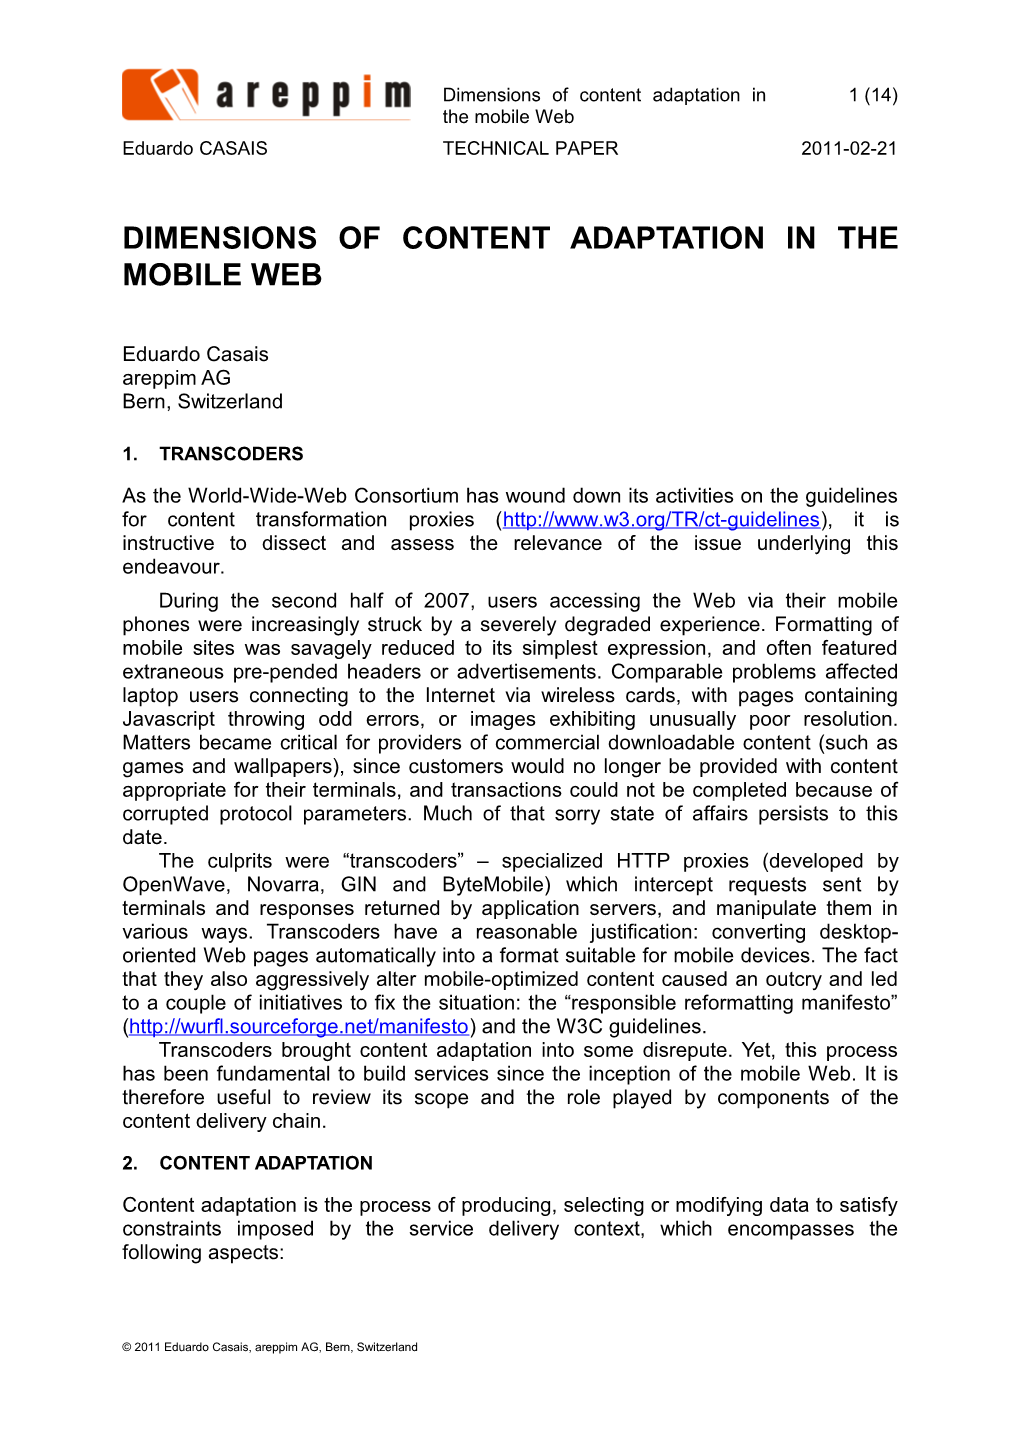 Dimensions of Content Adaptation in the Mobile Web